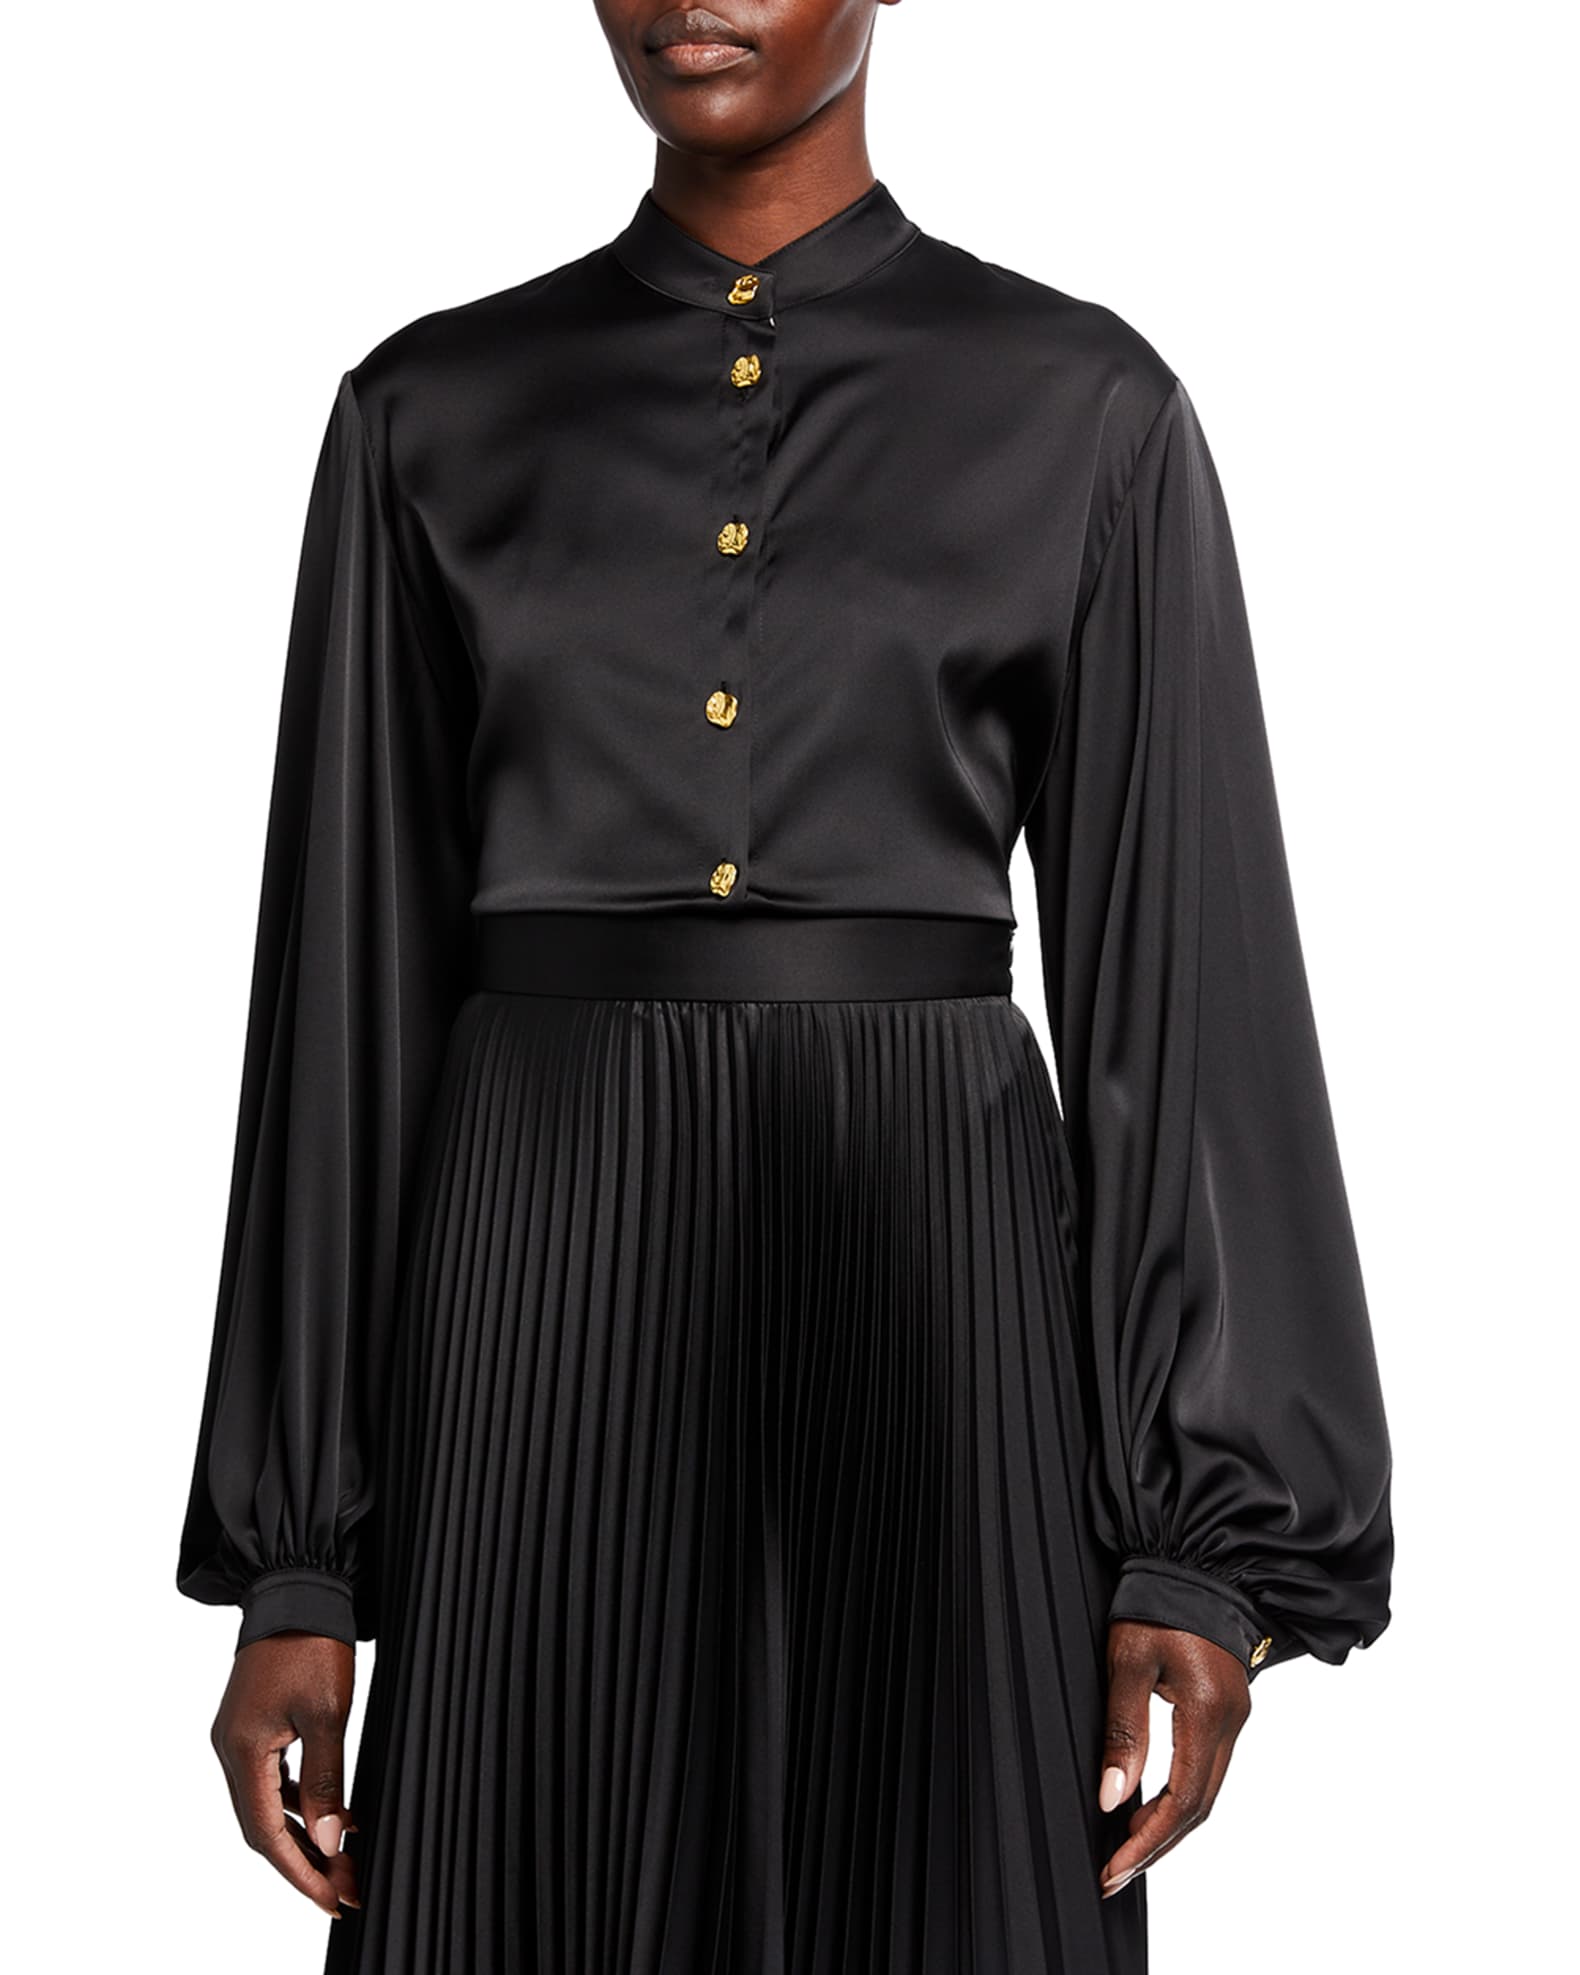 Noggis Oversized Satin Blouse and Matching Items | Neiman Marcus